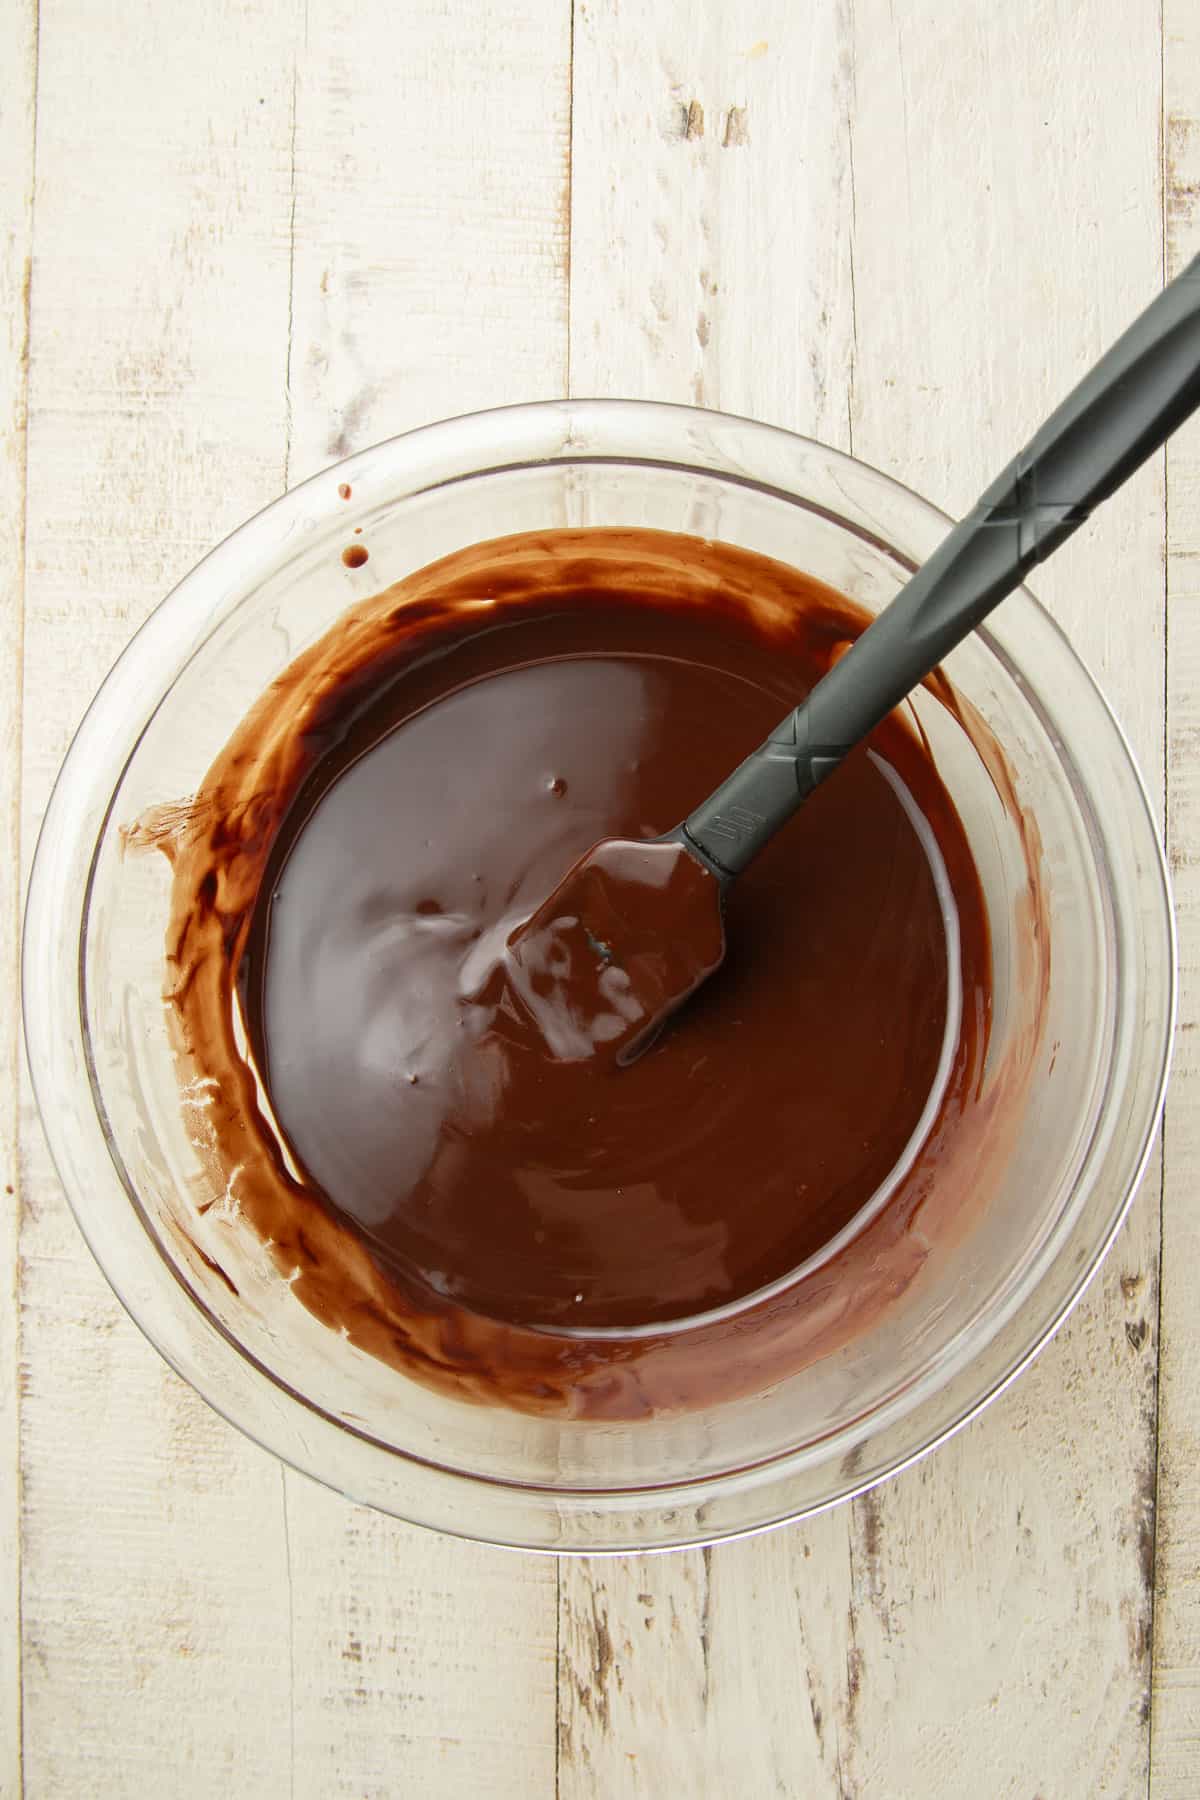 Melted chocolate in a mixing bowl with spatula.